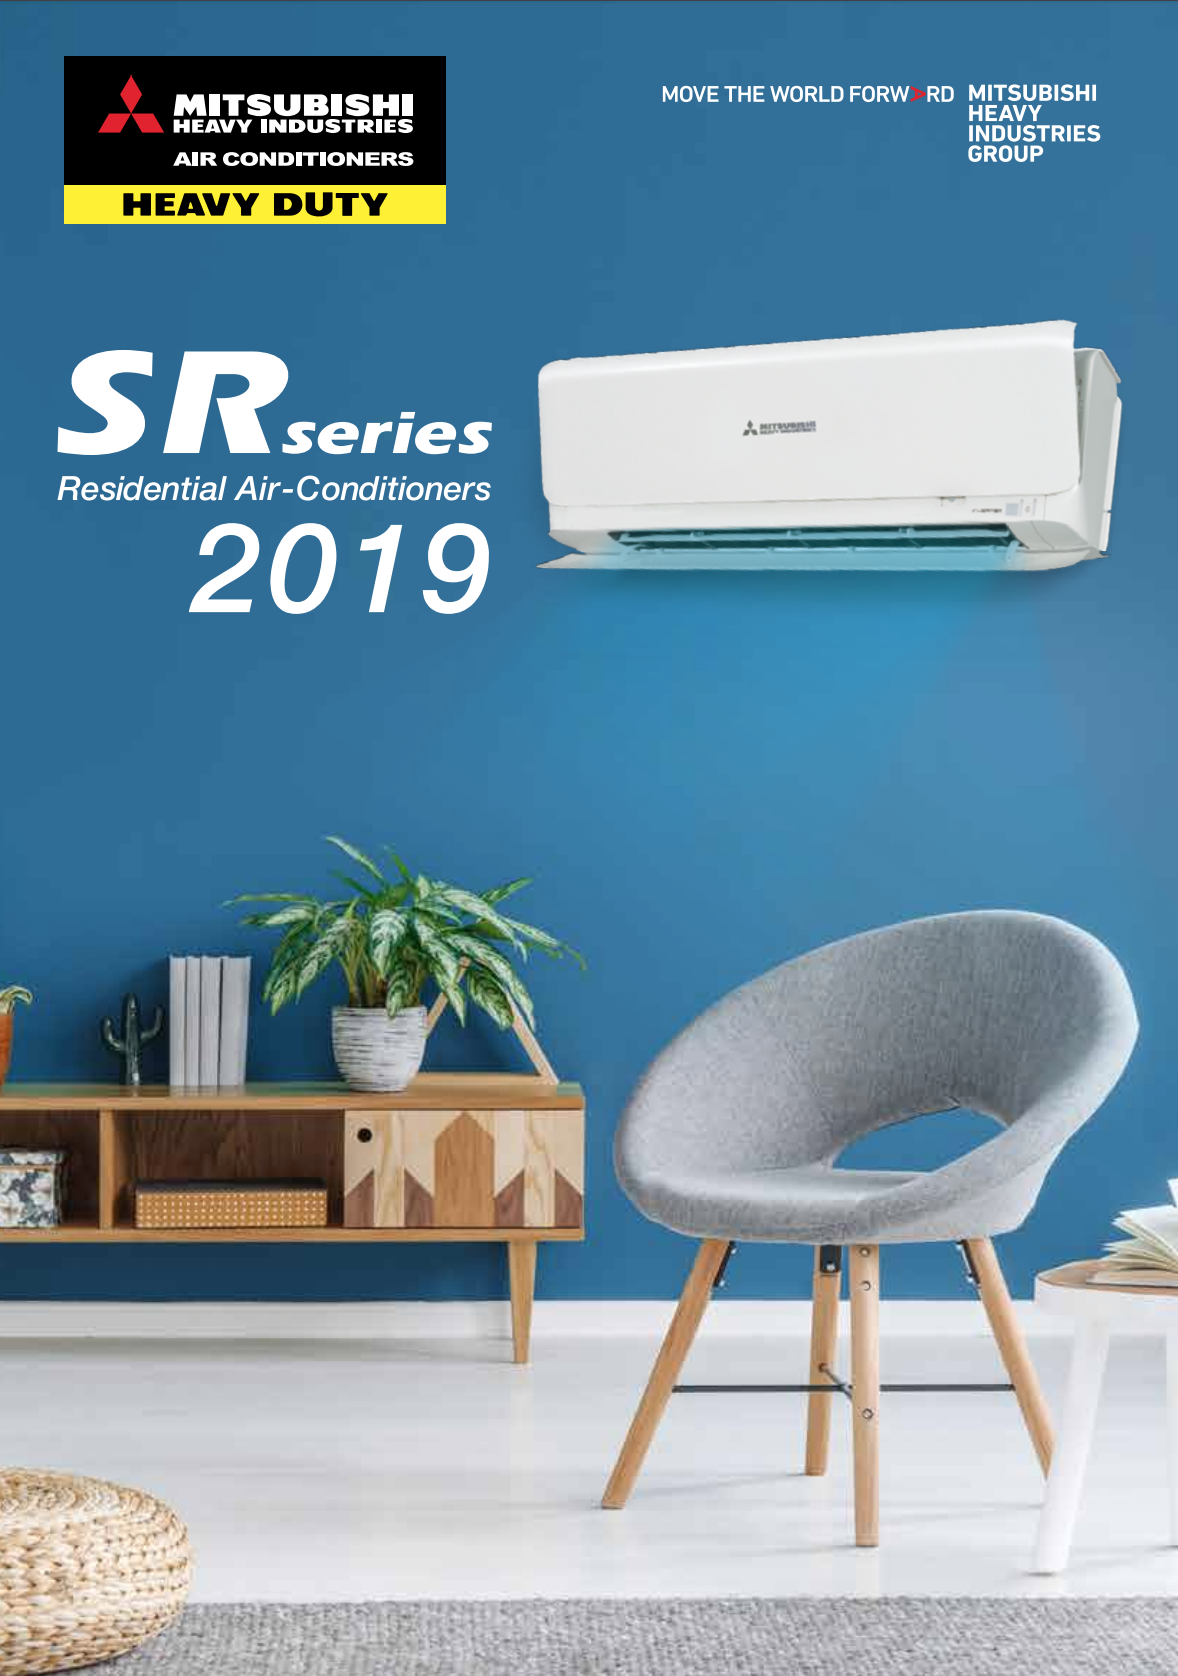 SR Series Residential Air-Conditioners 2019